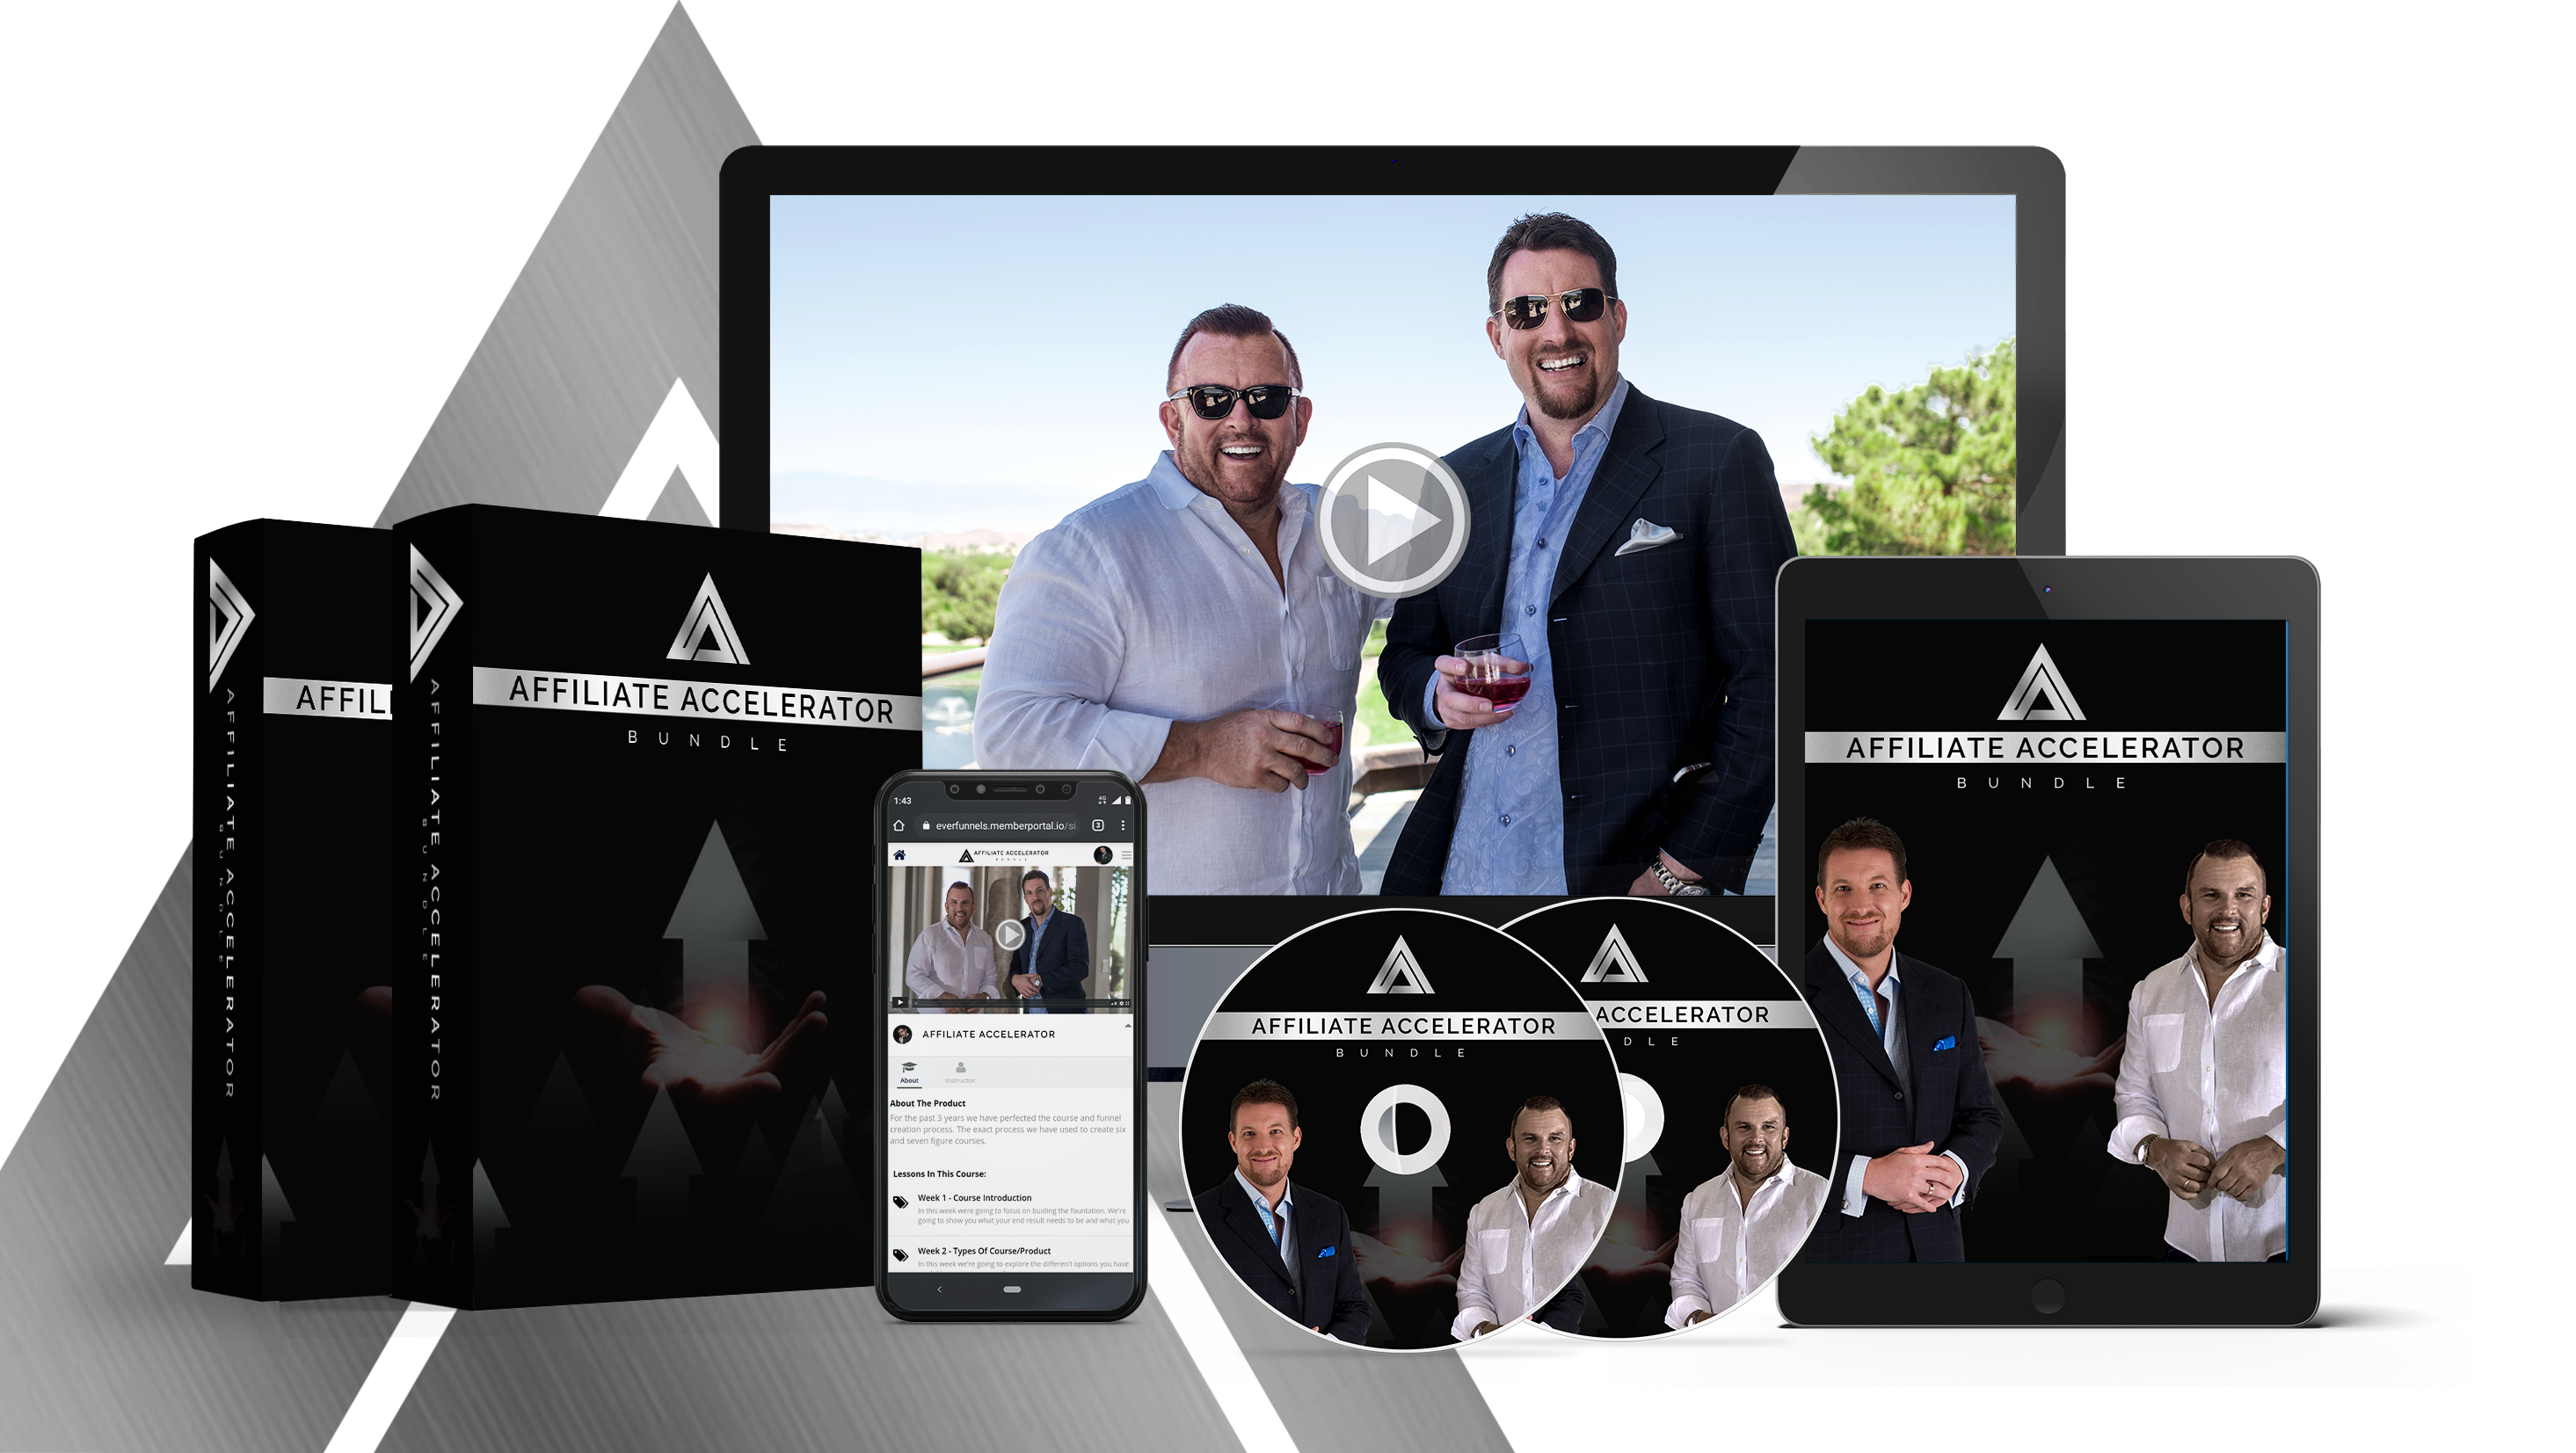 Perry Belcher and Chad Nicely, two of the best digital marketers worldwide,  will teach you how to be a Power Affiliate in their weekly trainings until September 21st. Hurry up to be part of this program and take action right now by clicking here to register !